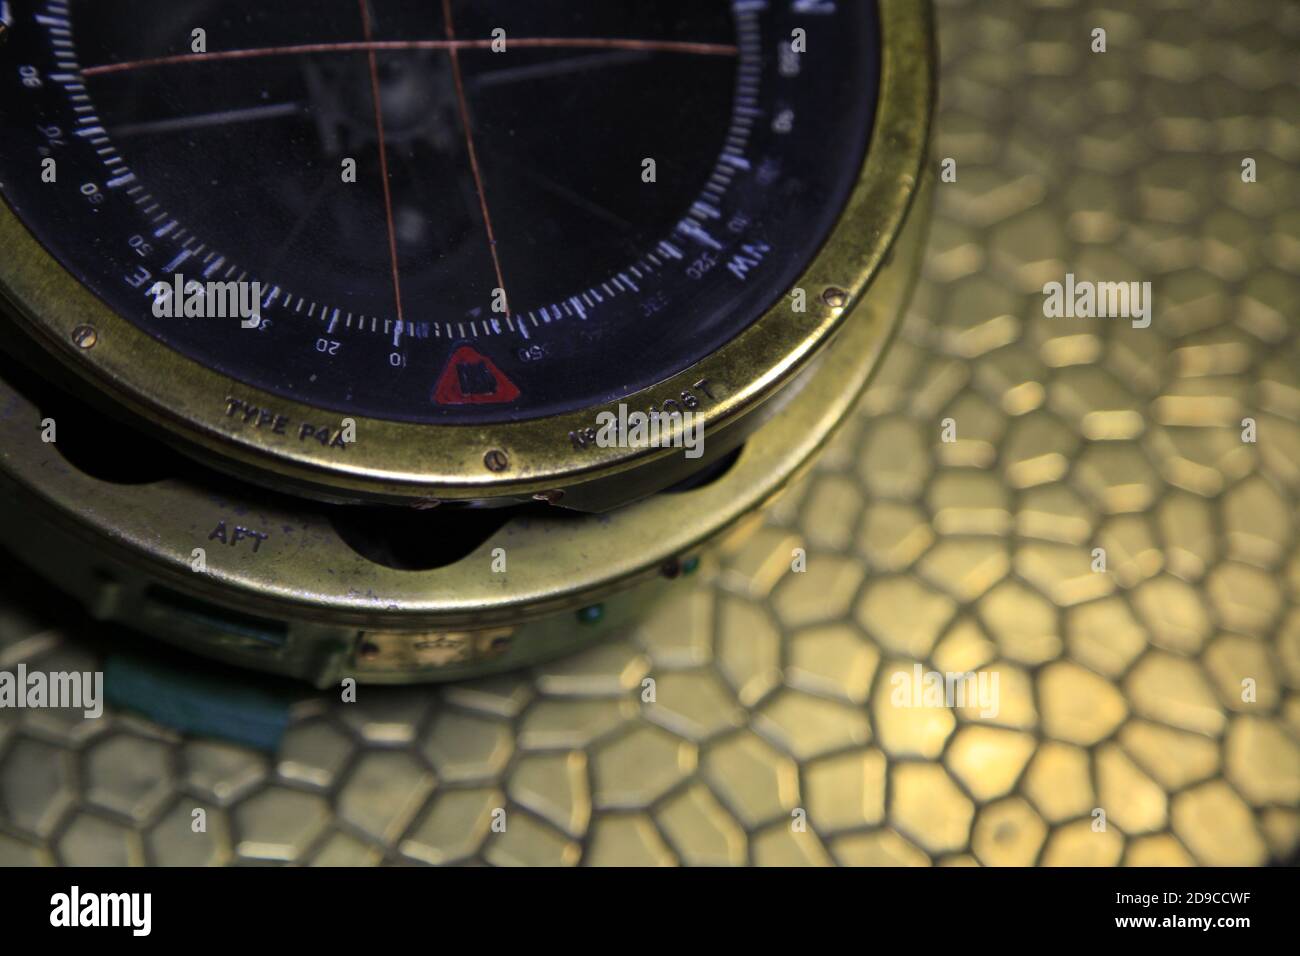 RAF P4A aircraft compass from the wartime. Used in Lancaster, Wellington, Sterling and other big bombers. Stock Photo